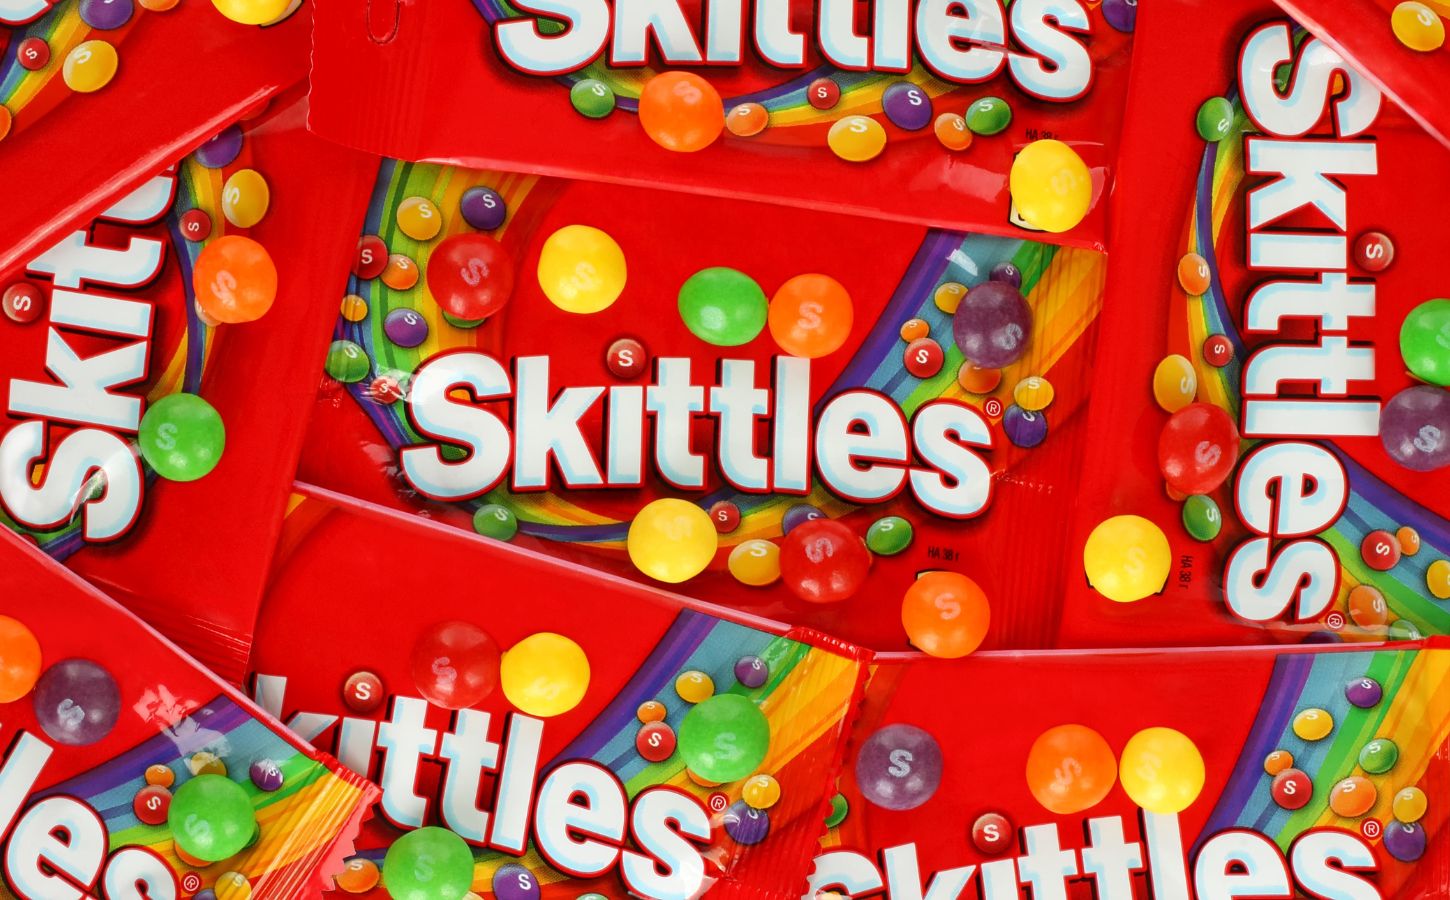 A close up shot of packets of vegan sweets, made by candy brand Skittles